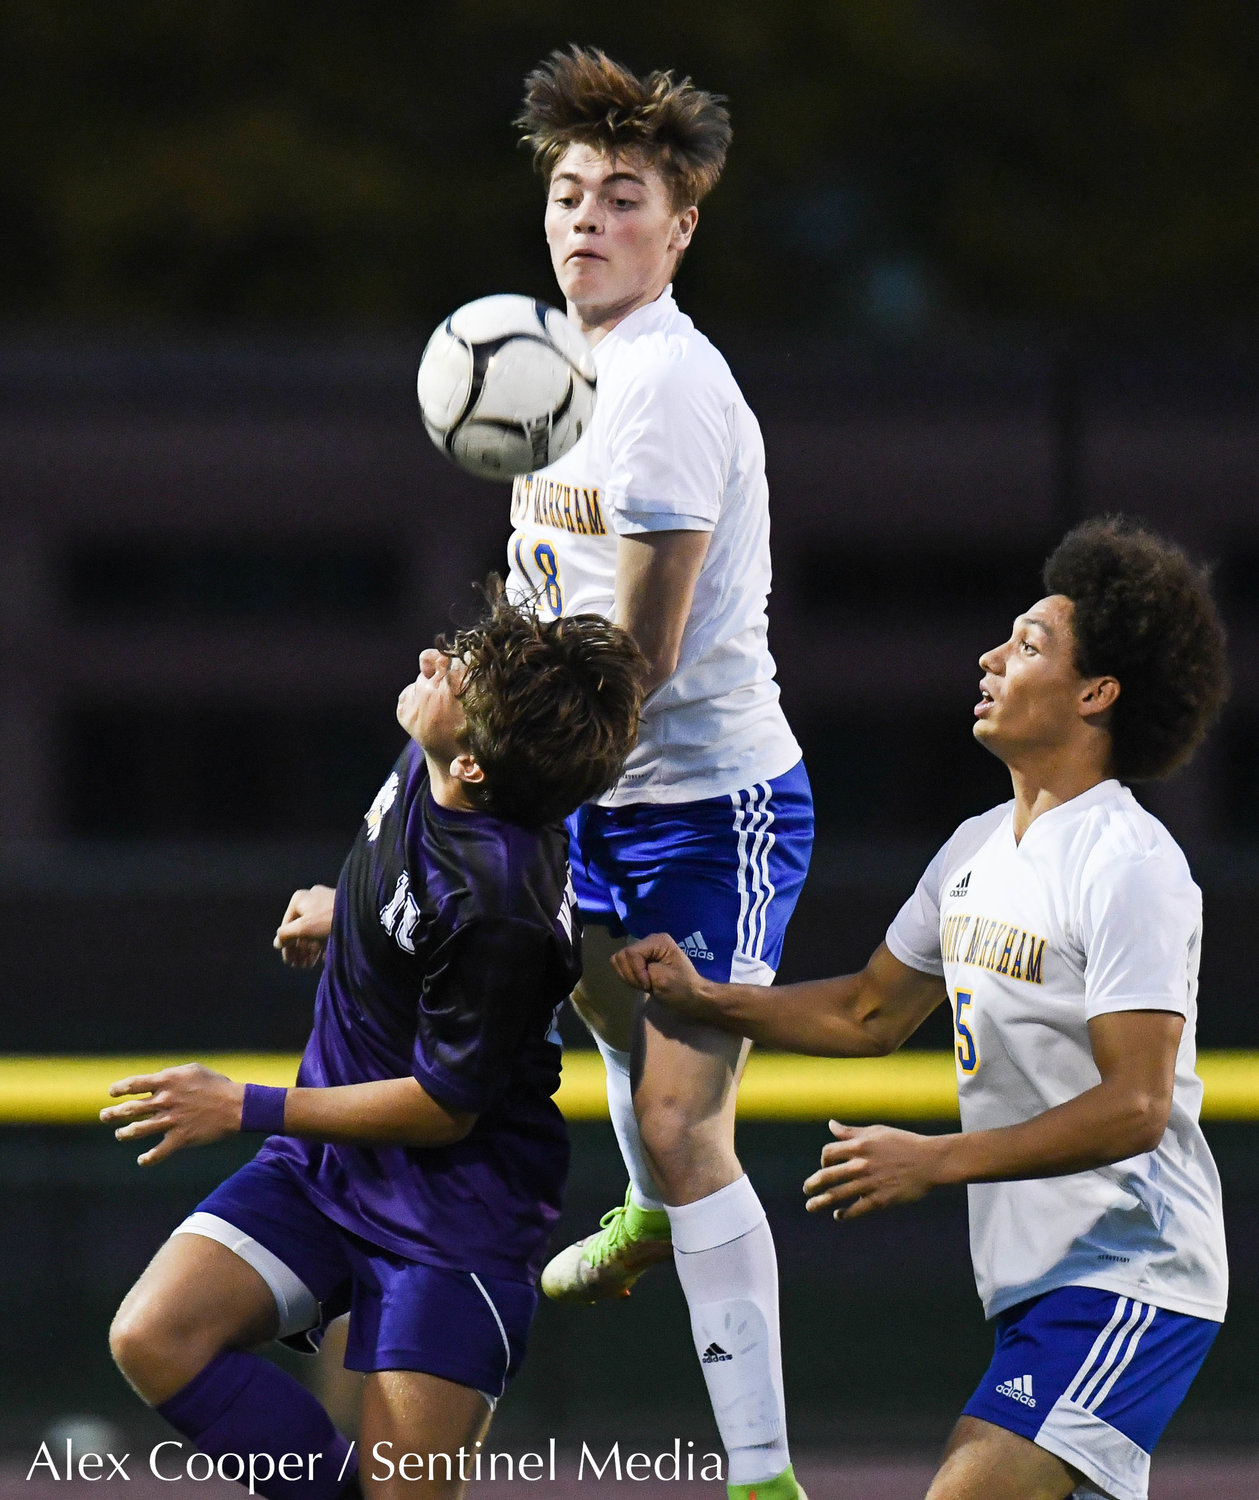 Waterville player Connor Stanton and Mt. Markham players Bryce Lynch and Will Lunny fight for control of the ball during the Class C boys soccer semifinals on Wednesday, Oct. 26 at Canastota.